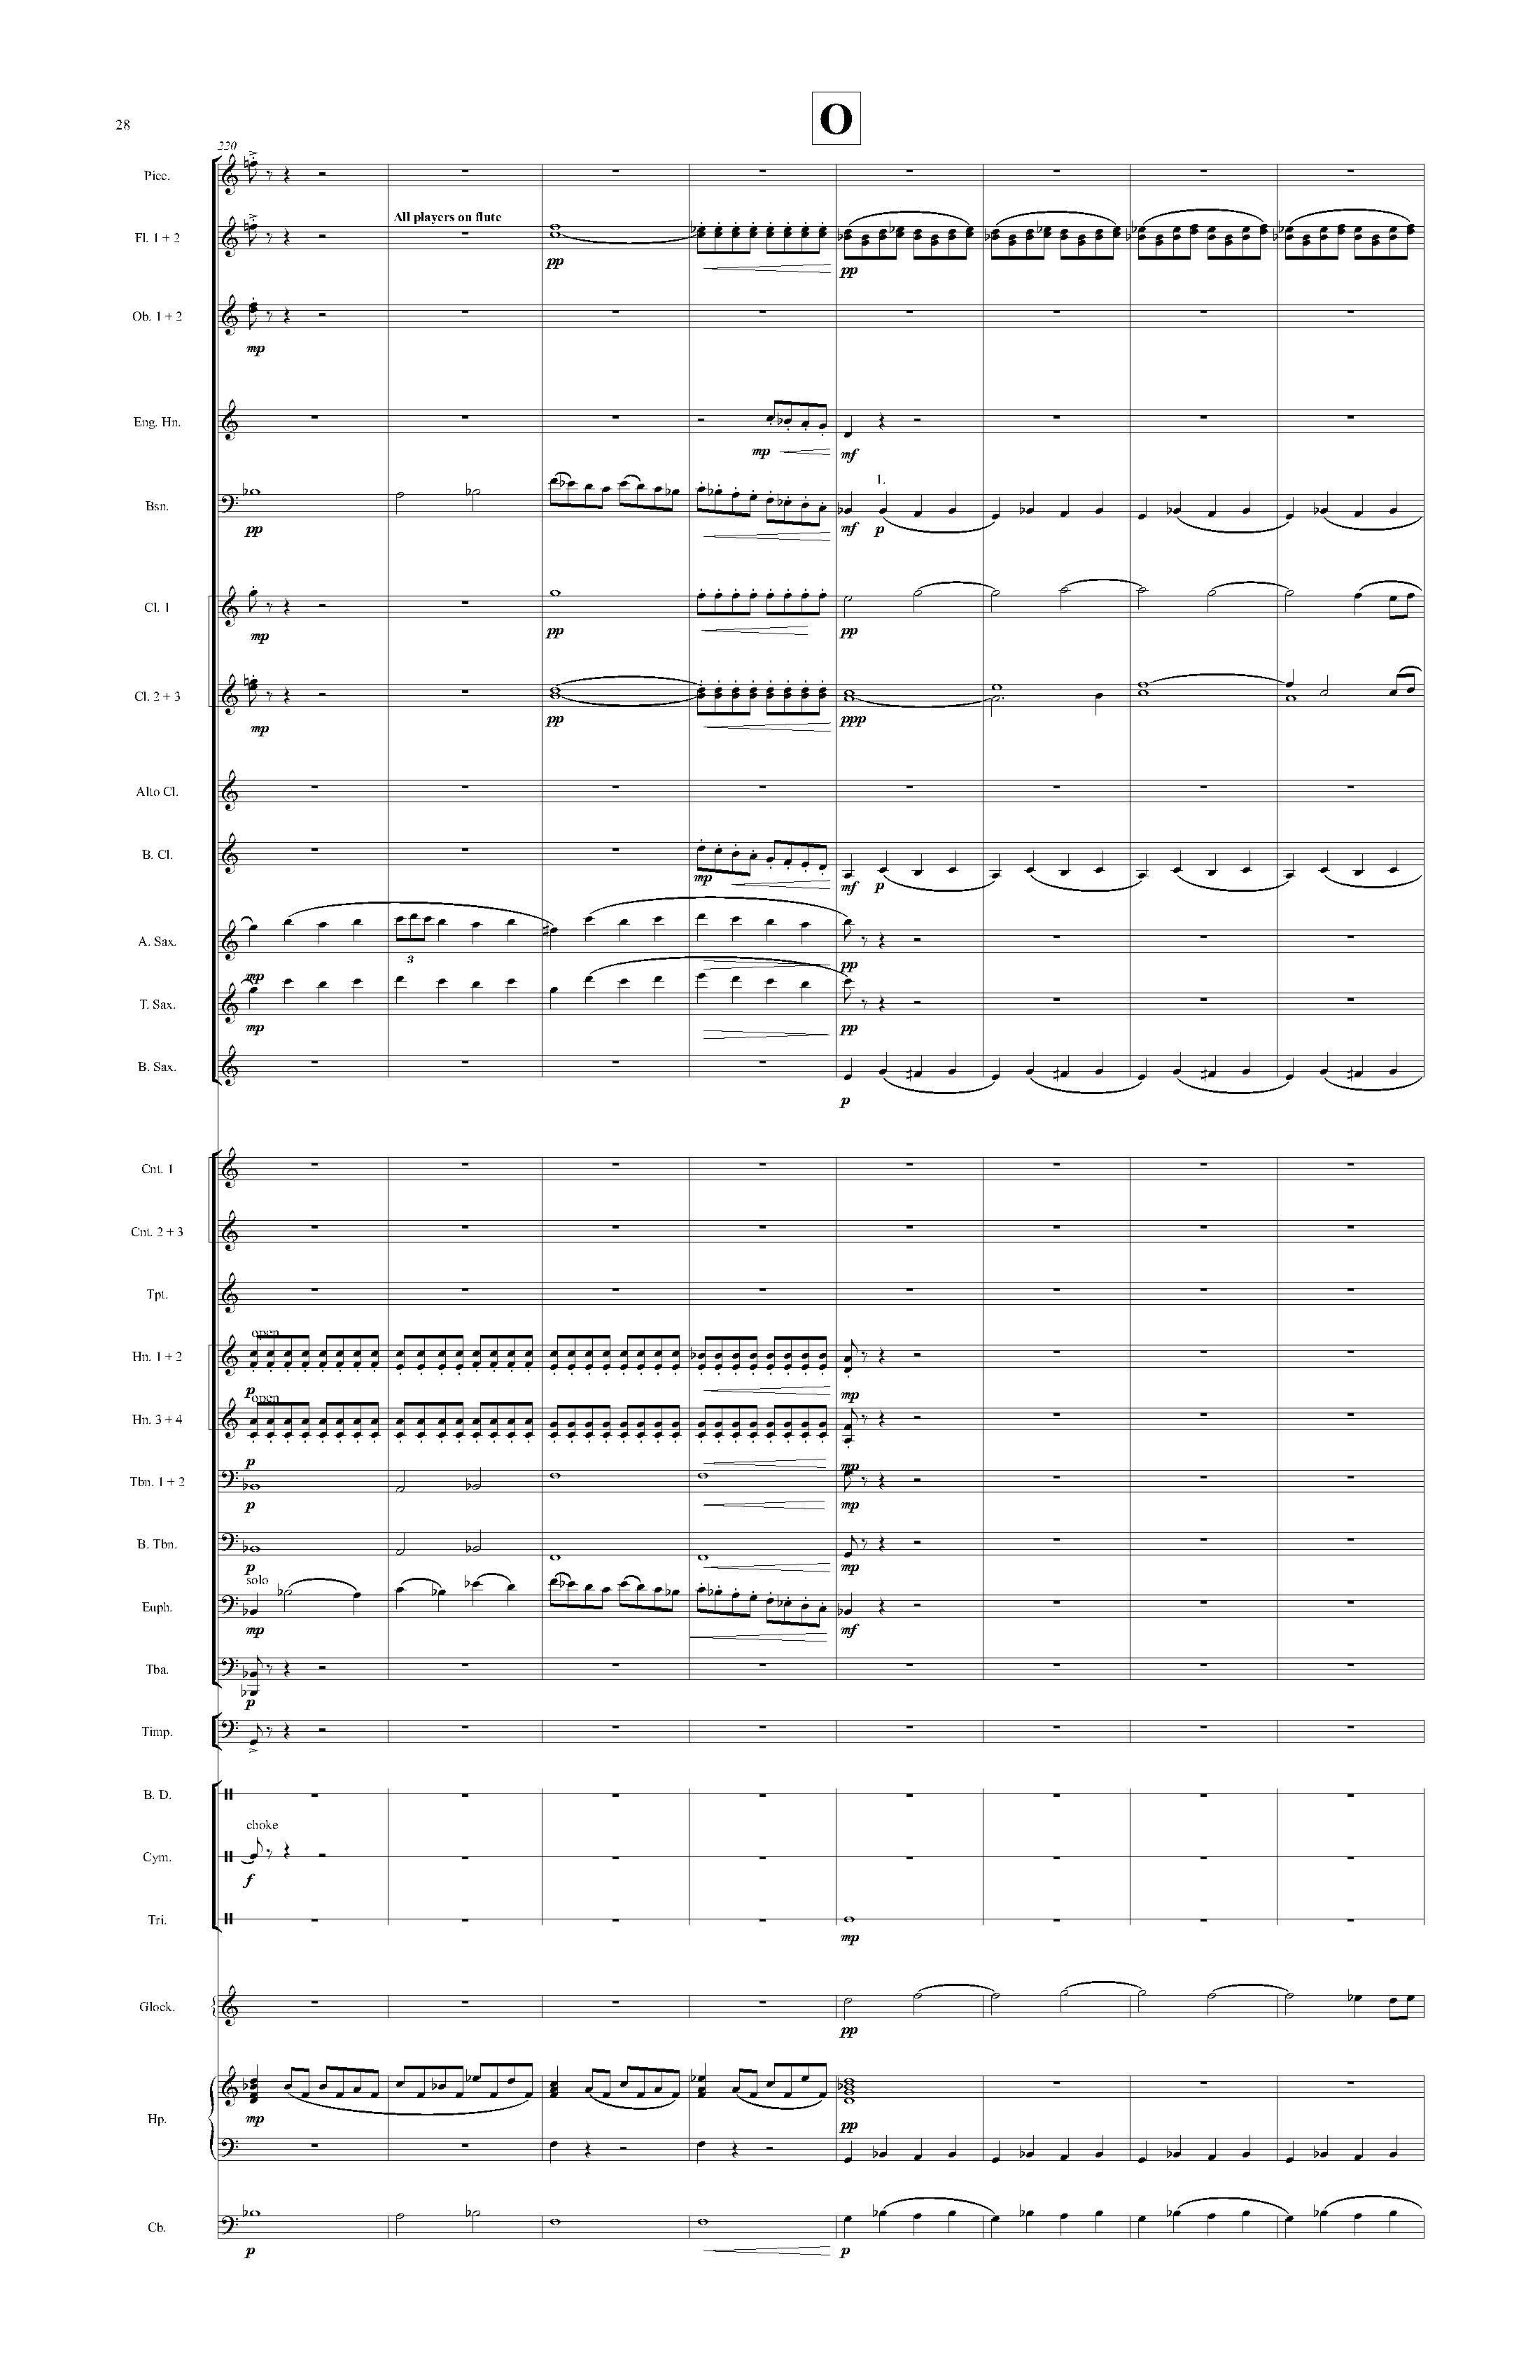 Psyche - Complete Score_Page_34.jpg